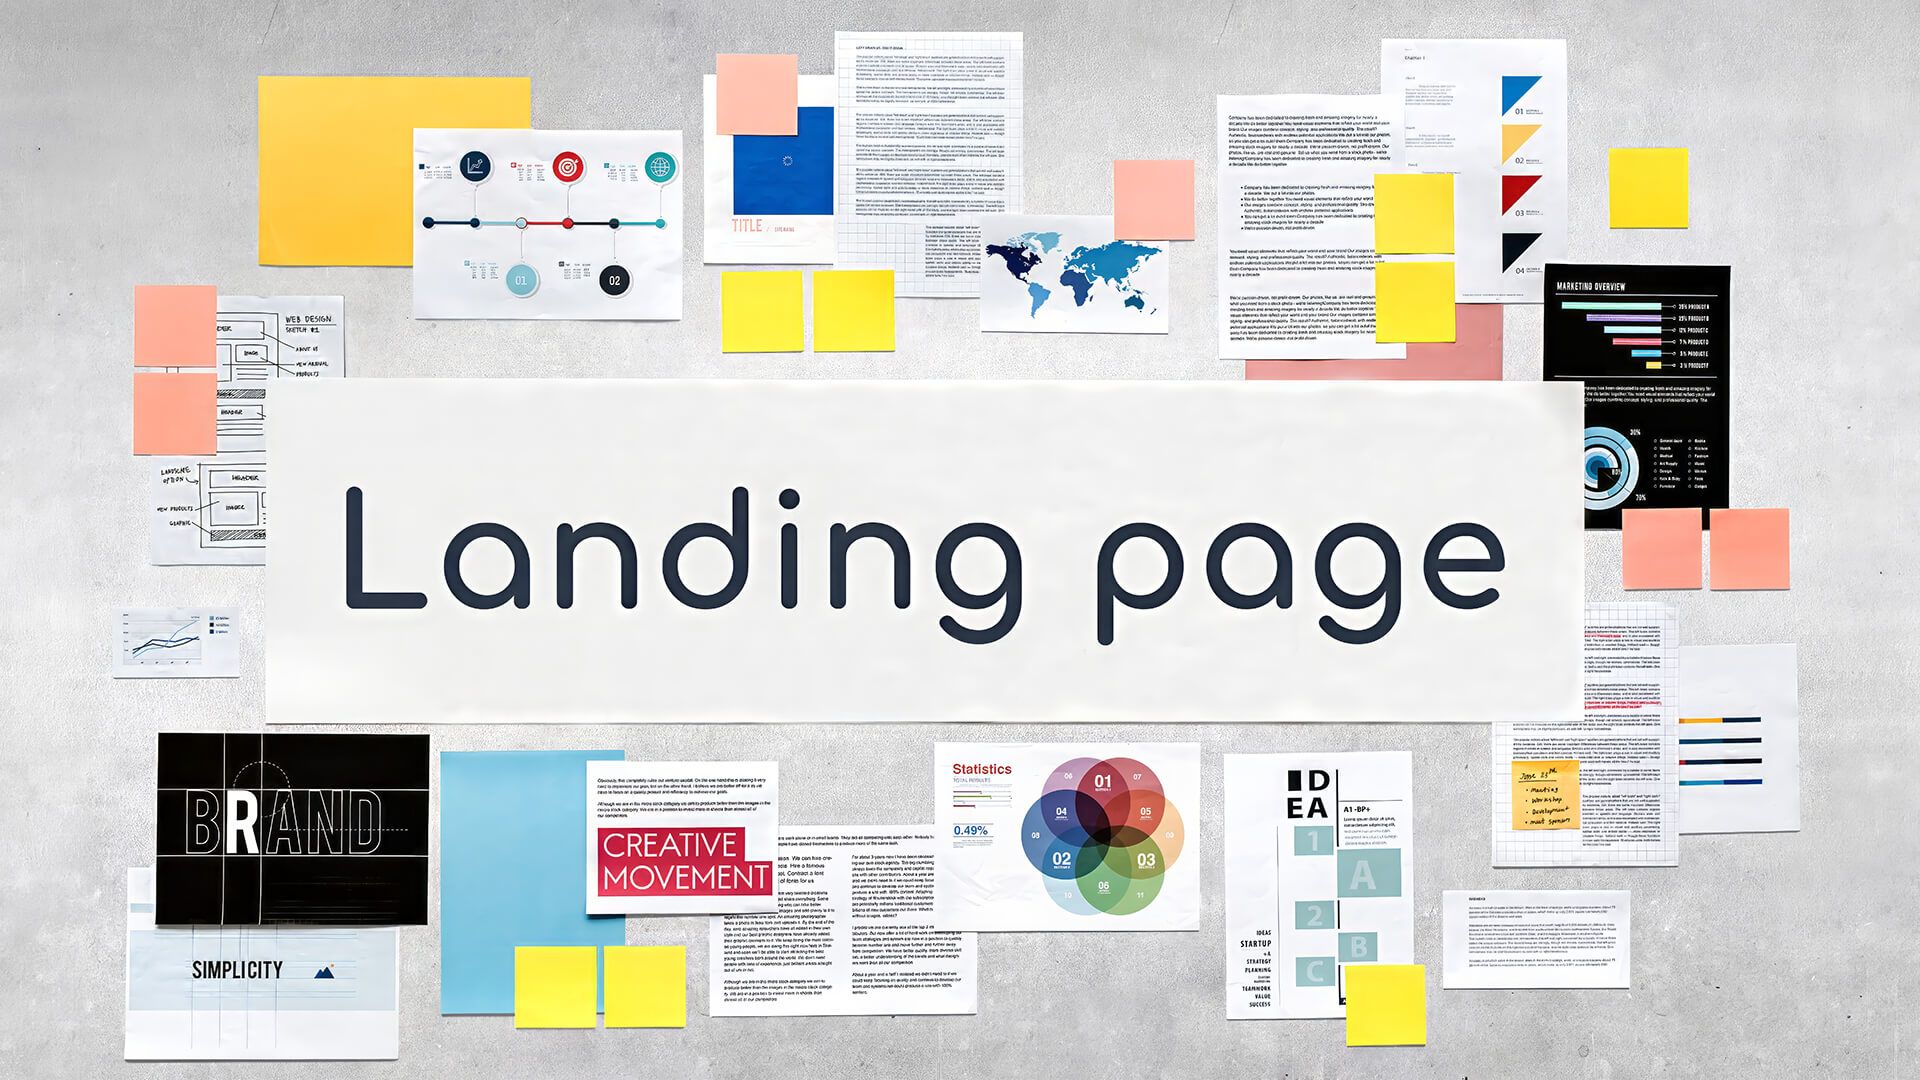 A landing page is a one-page site